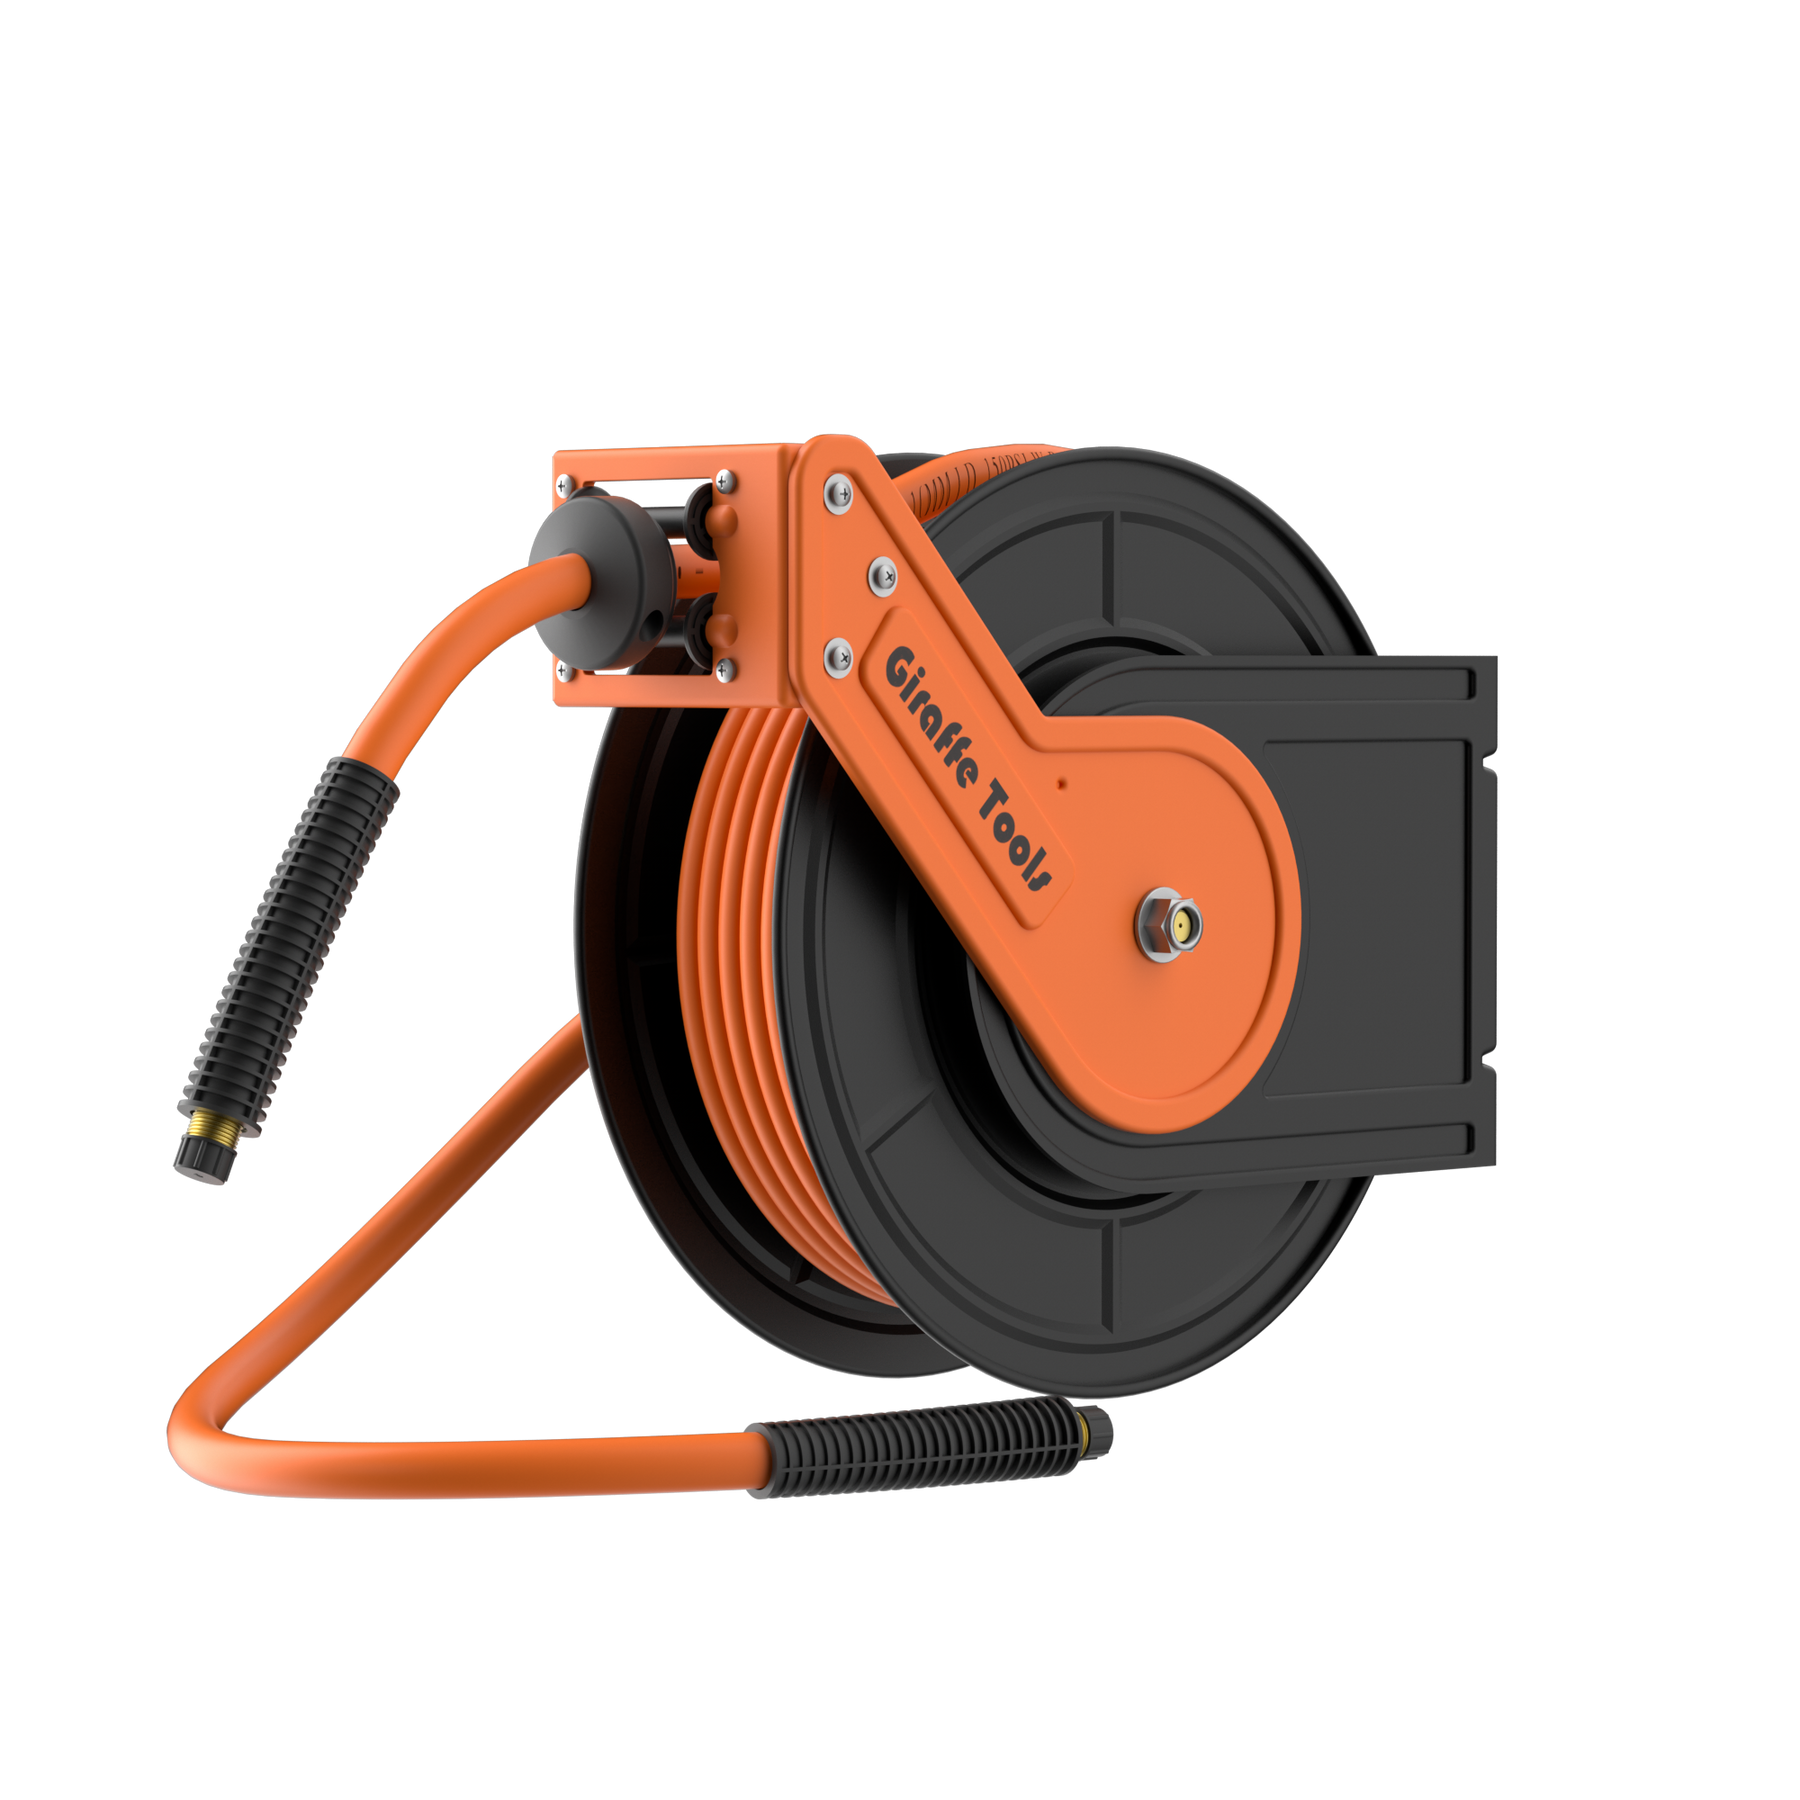 VEVOR 100ft Automatic Retractable Wall-Mounted Garden Hose Reel with Water  Spray